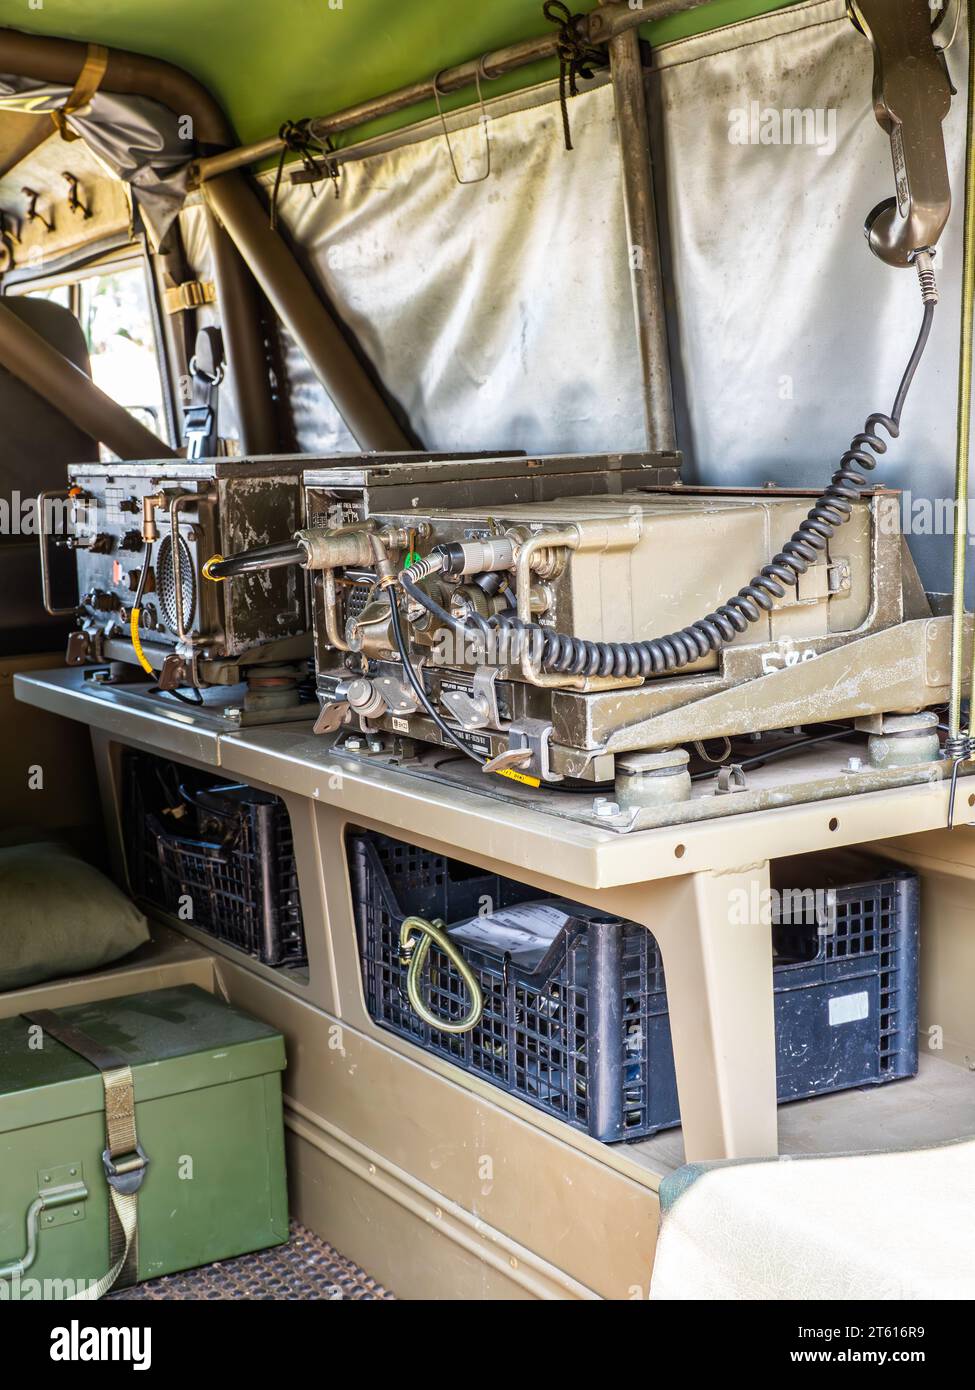 Military radio equipment in the rear of an Australian military vehicle - Land Rover Perentie Stock Photo